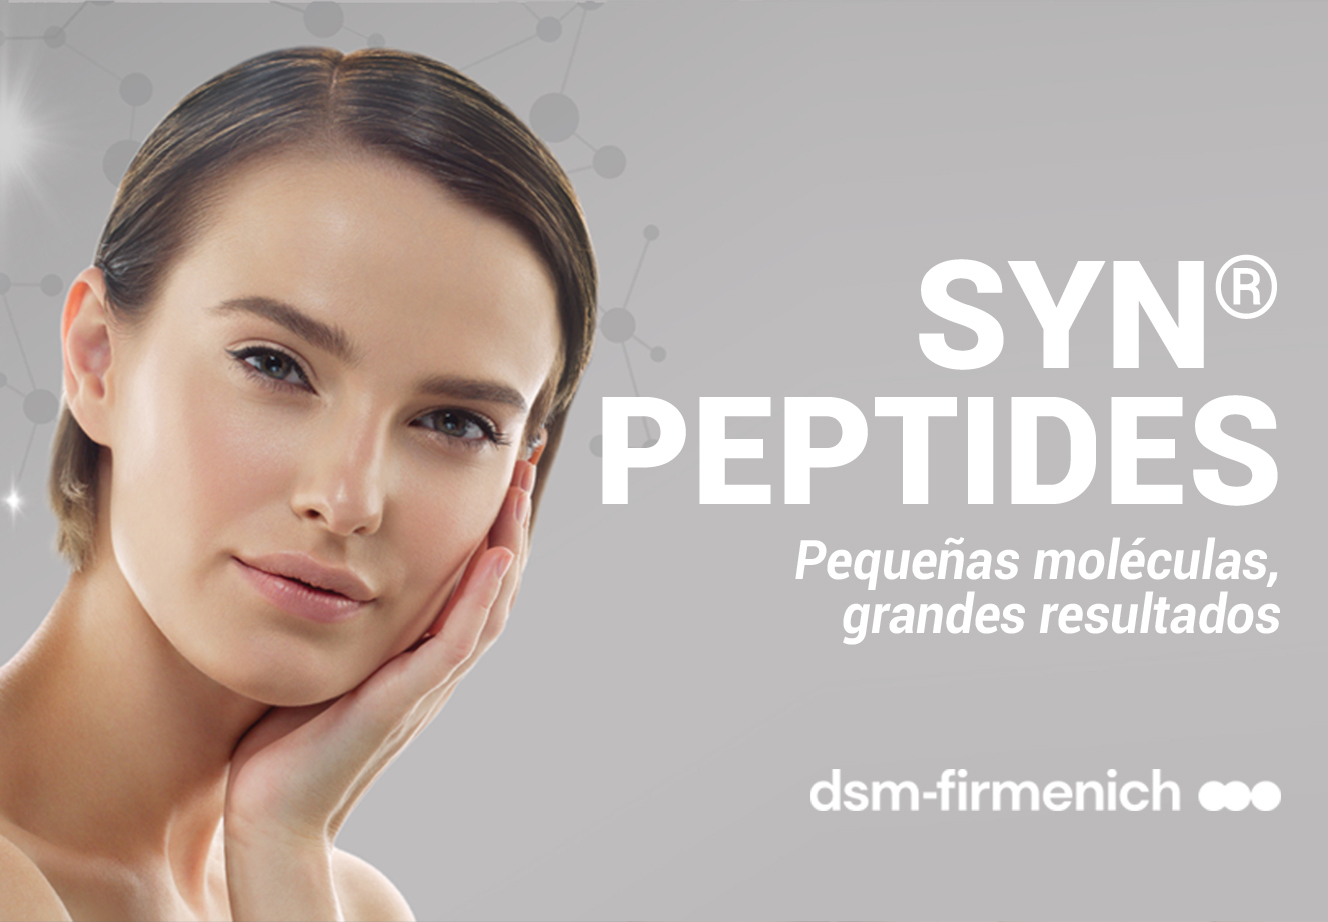 SYN®-PEPTIDES